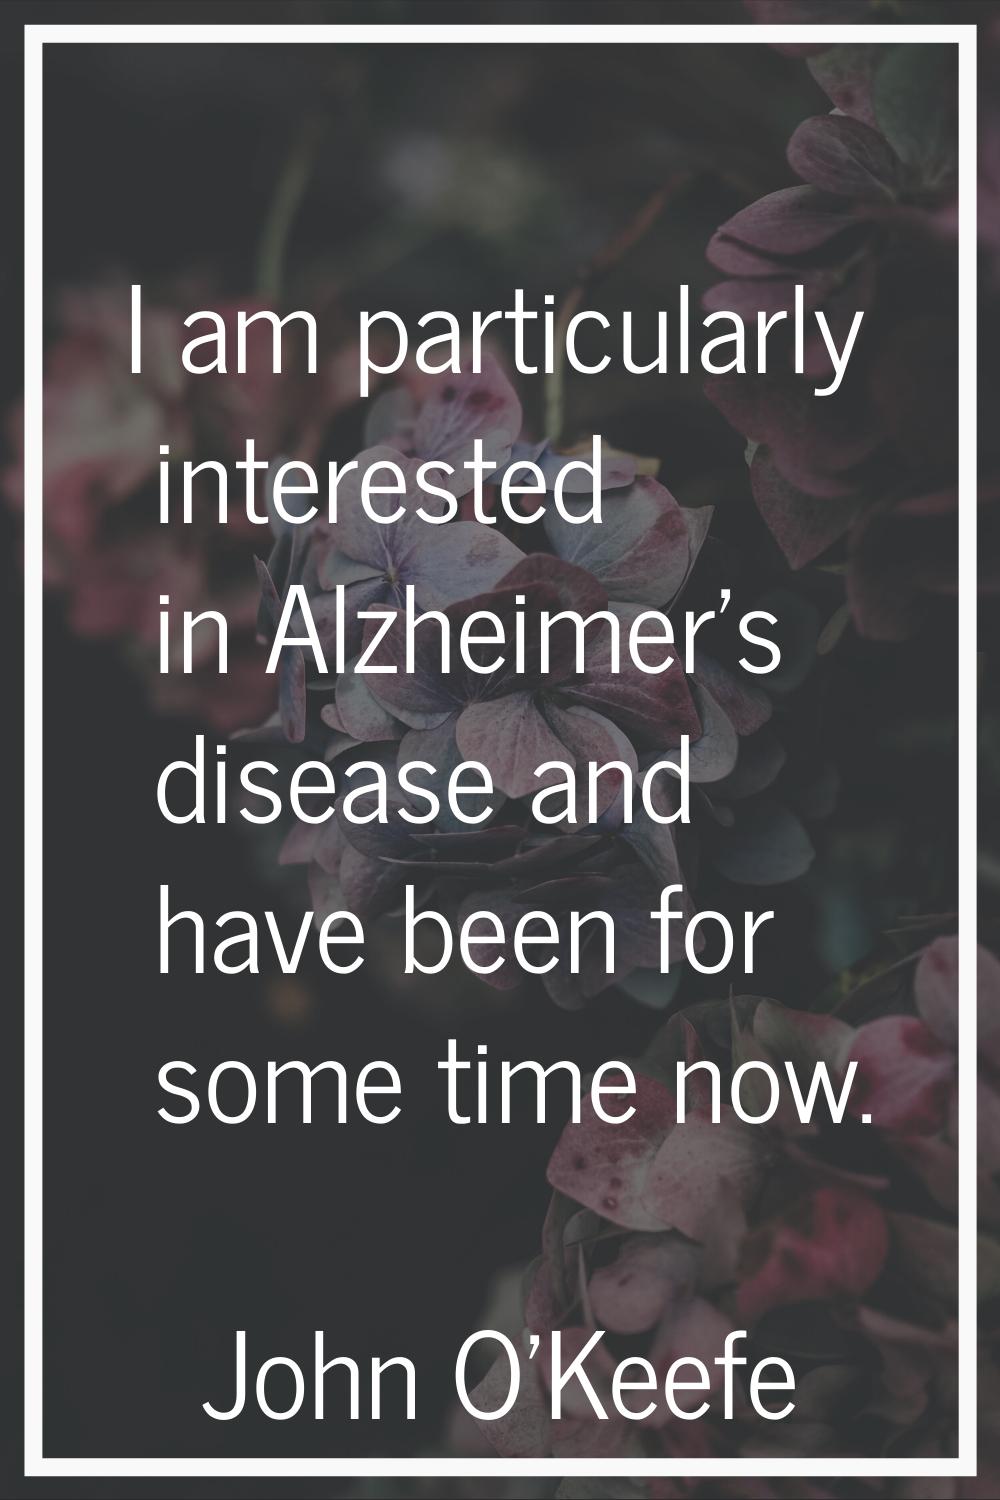 I am particularly interested in Alzheimer's disease and have been for some time now.